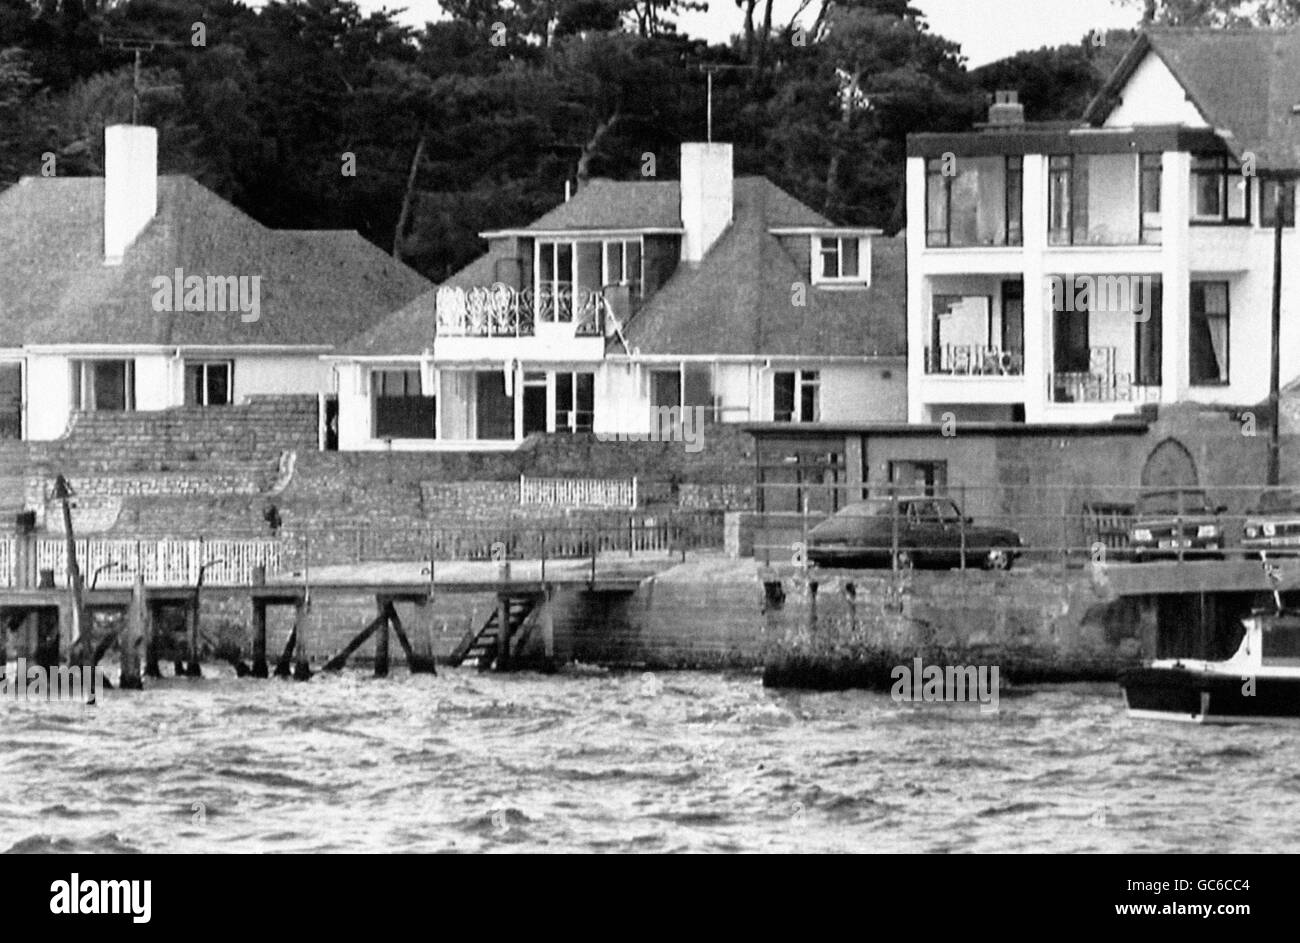 SEA-SIDE BUNGALOW {CENTRE} BOUGHT BY JOHN LENNON FOR HIS AUNT MIMI, WHO BROUGHT HIM UP. MIMI SMITH DIED IN DECEMBER & THE HOUSE, IN POOLE, DORSET, IS TO BE AUCTIONED. Stock Photo